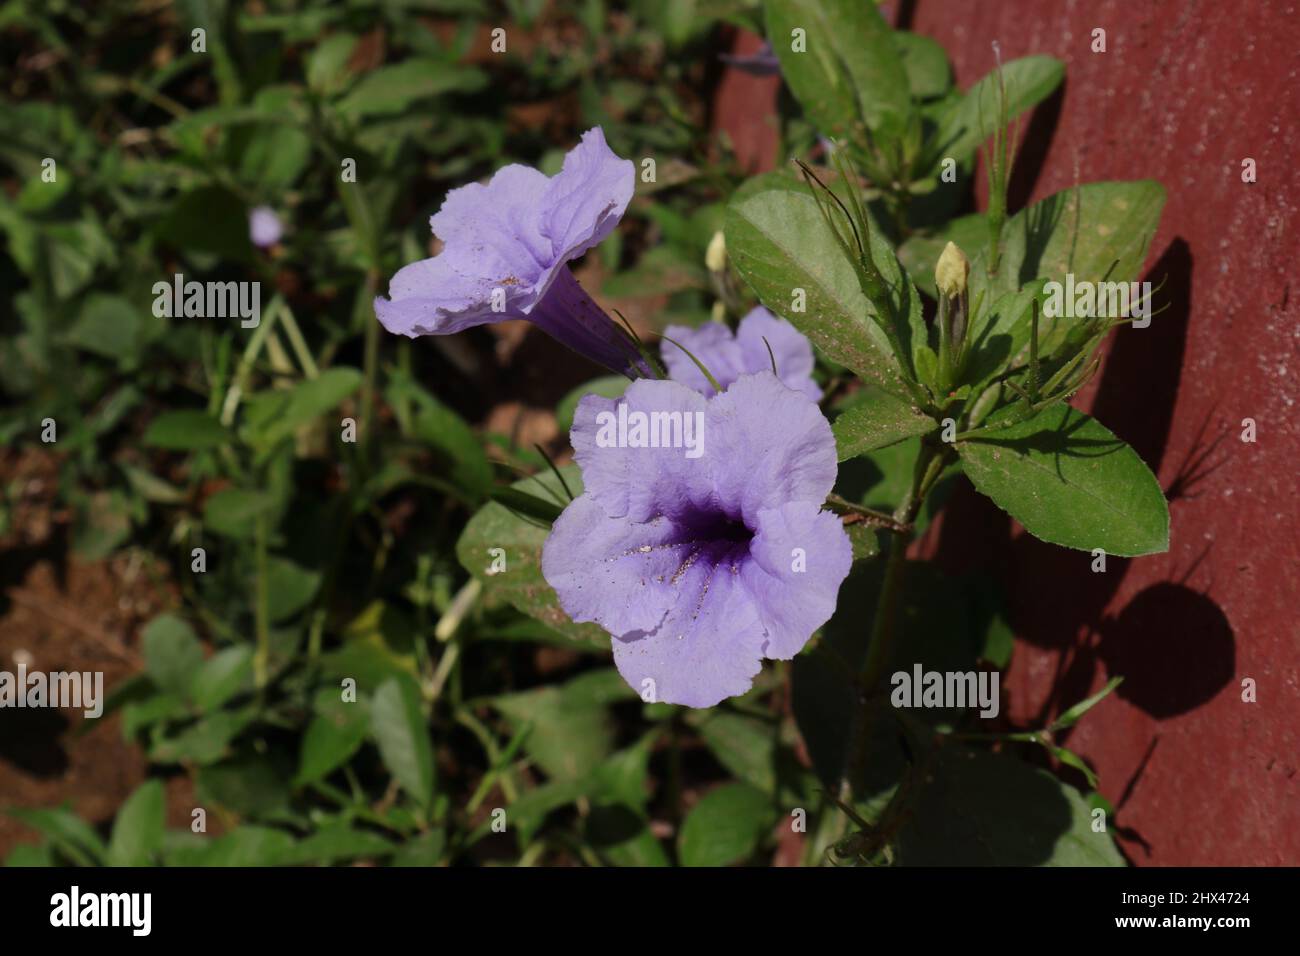 Close up of Ruellia or wild Petunia plant with purple flowers and buds and pods near a cement wall Stock Photo